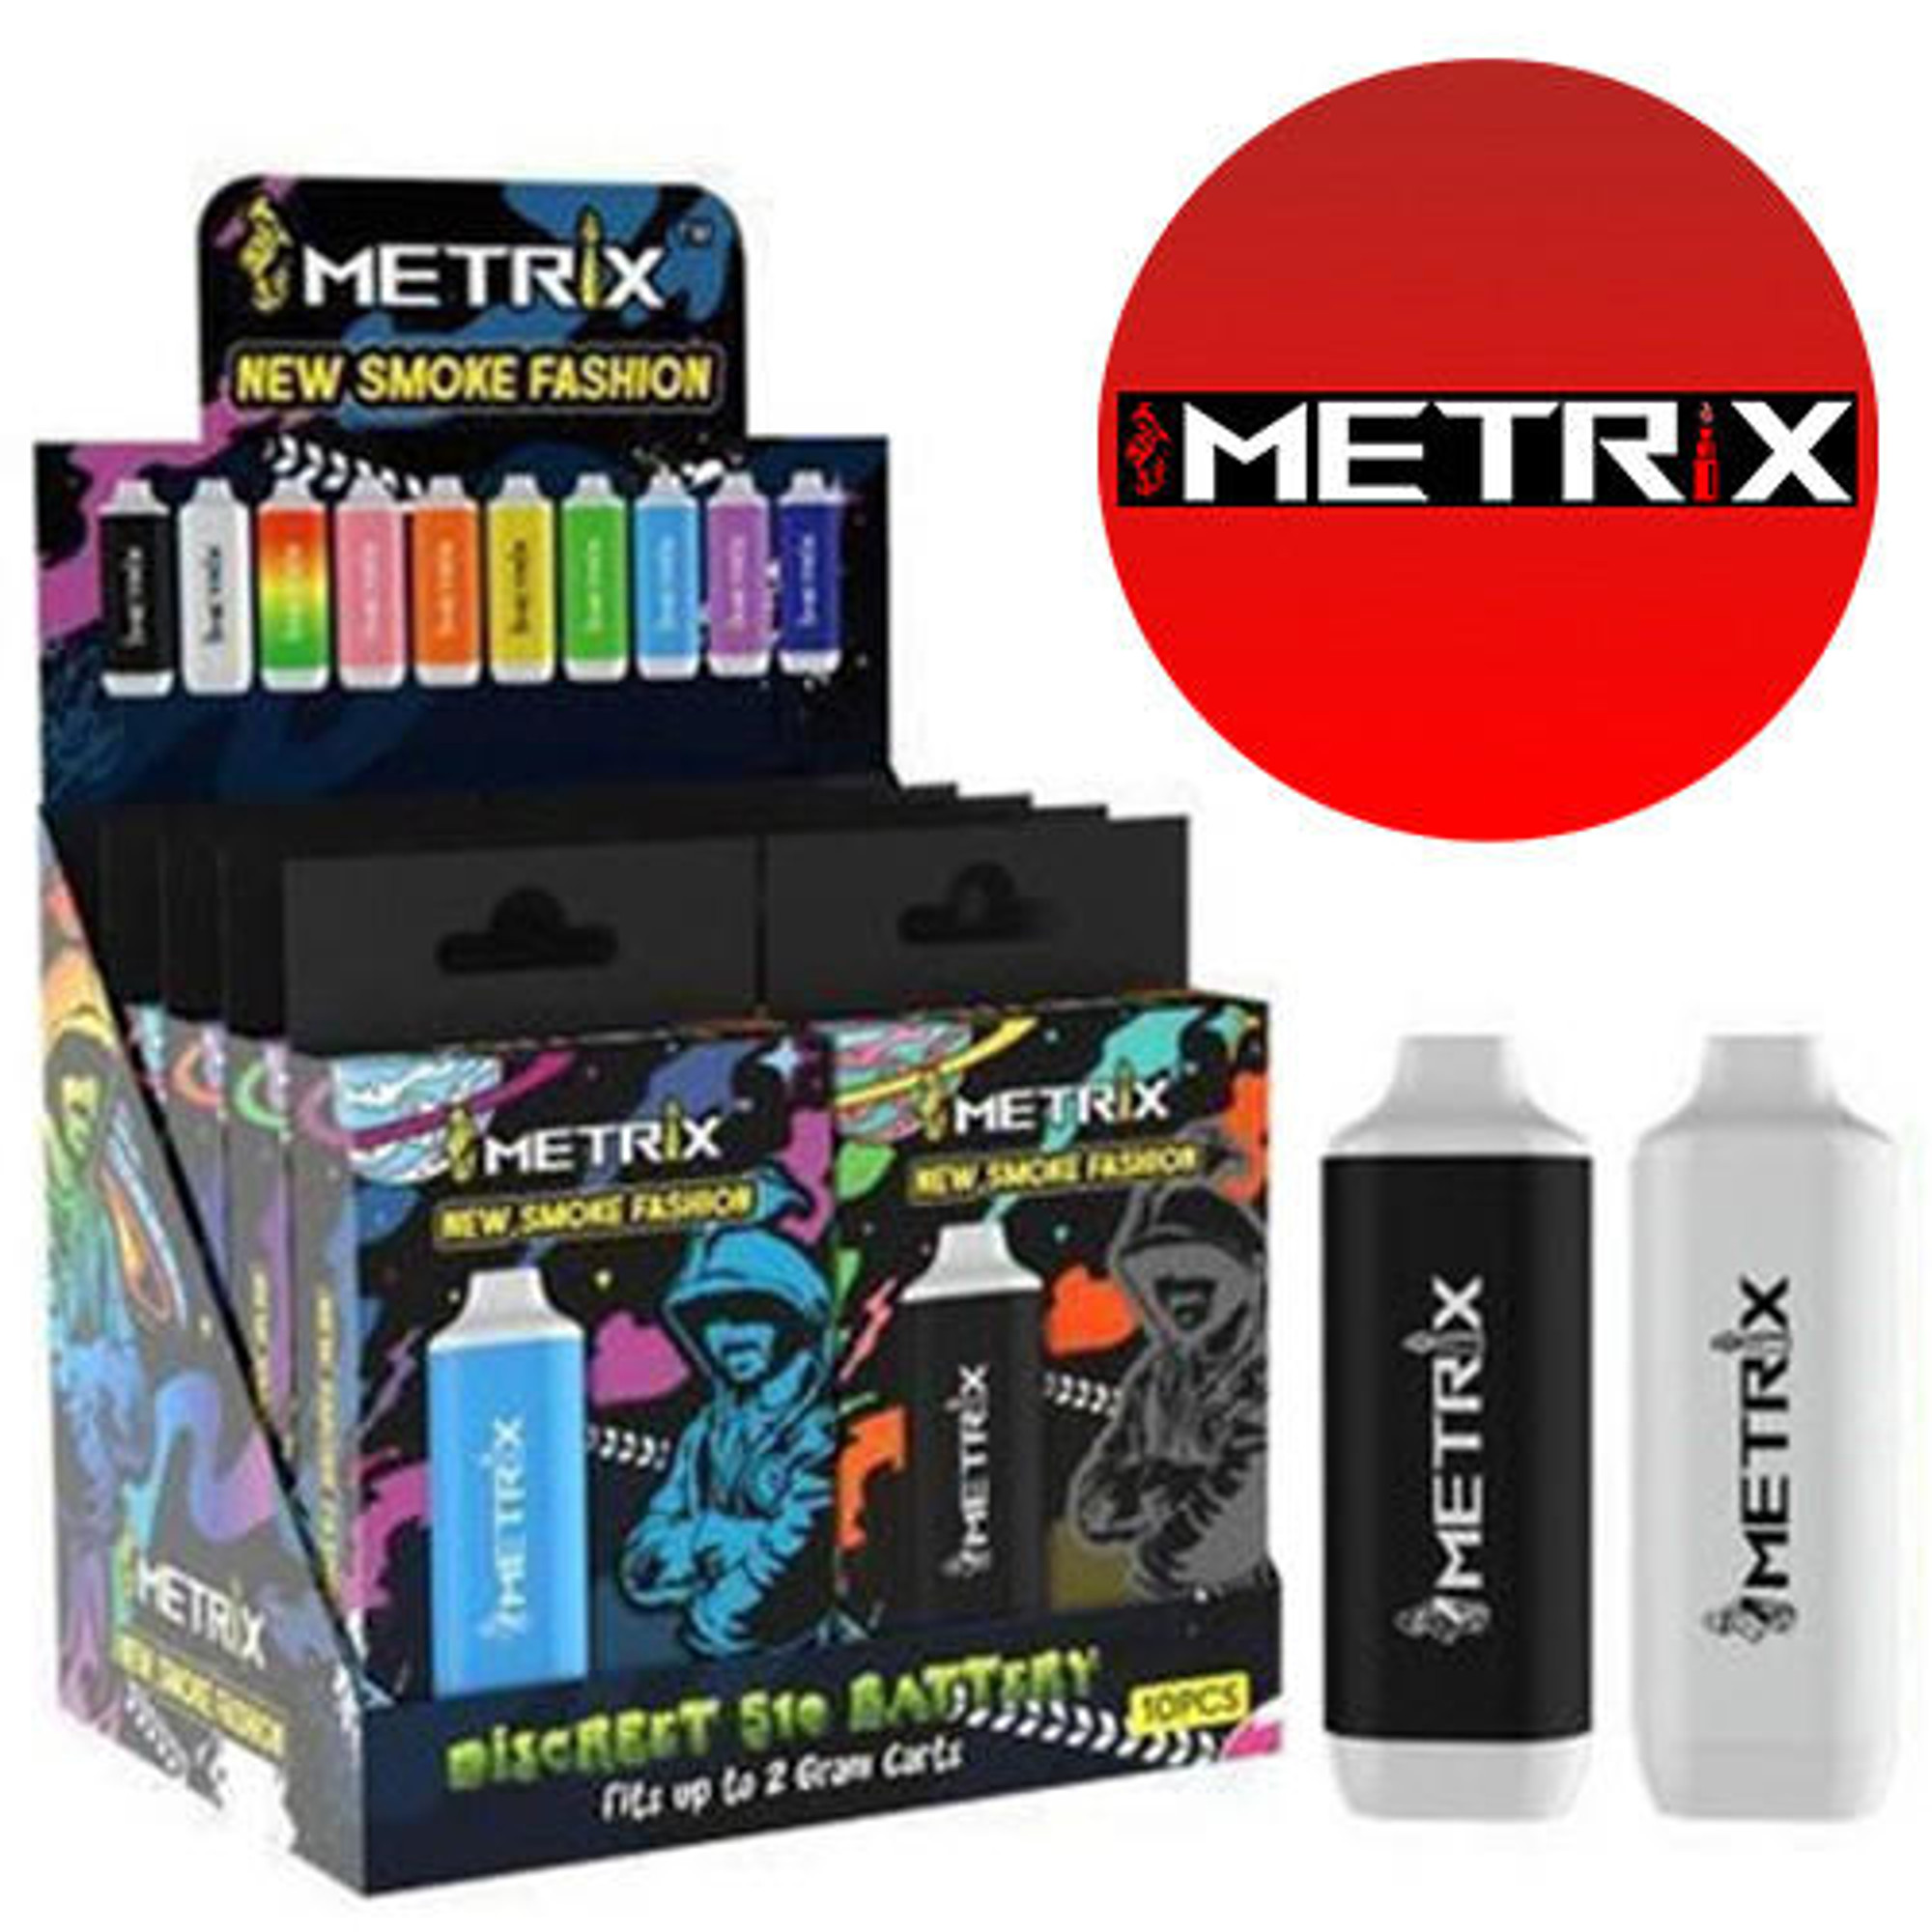 https://cdn11.bigcommerce.com/s-4hr592w/images/stencil/2000x2000/products/15697/48316/metrix-new-smoke-fashion-510-mixed-color-battery-display-10ct__38493.1682407885.jpg?c=2